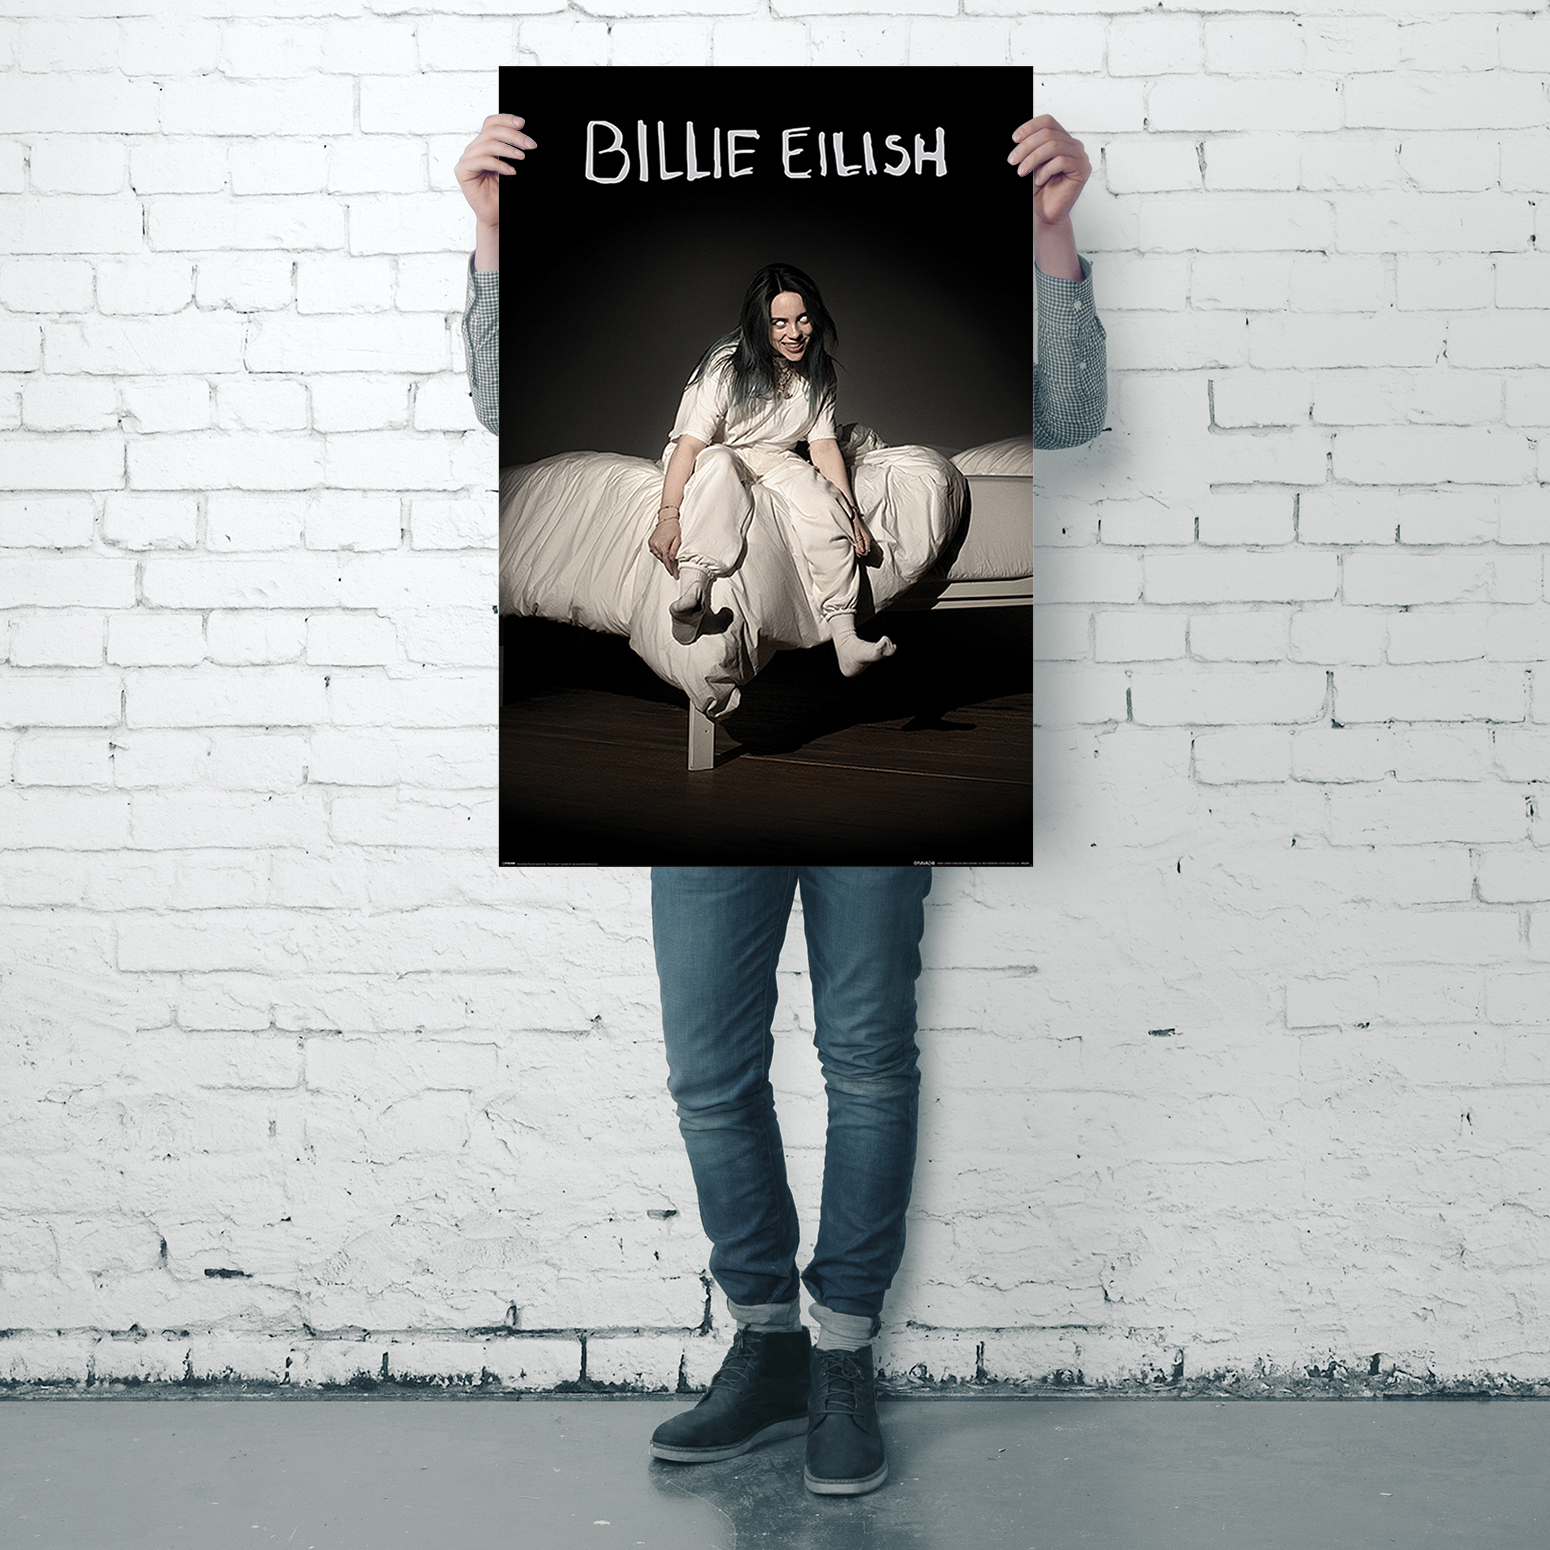 Billie Eilish Poster Where We All Asleep in Up buy Posters now Fall the GmbH - When We shop Do Go Close